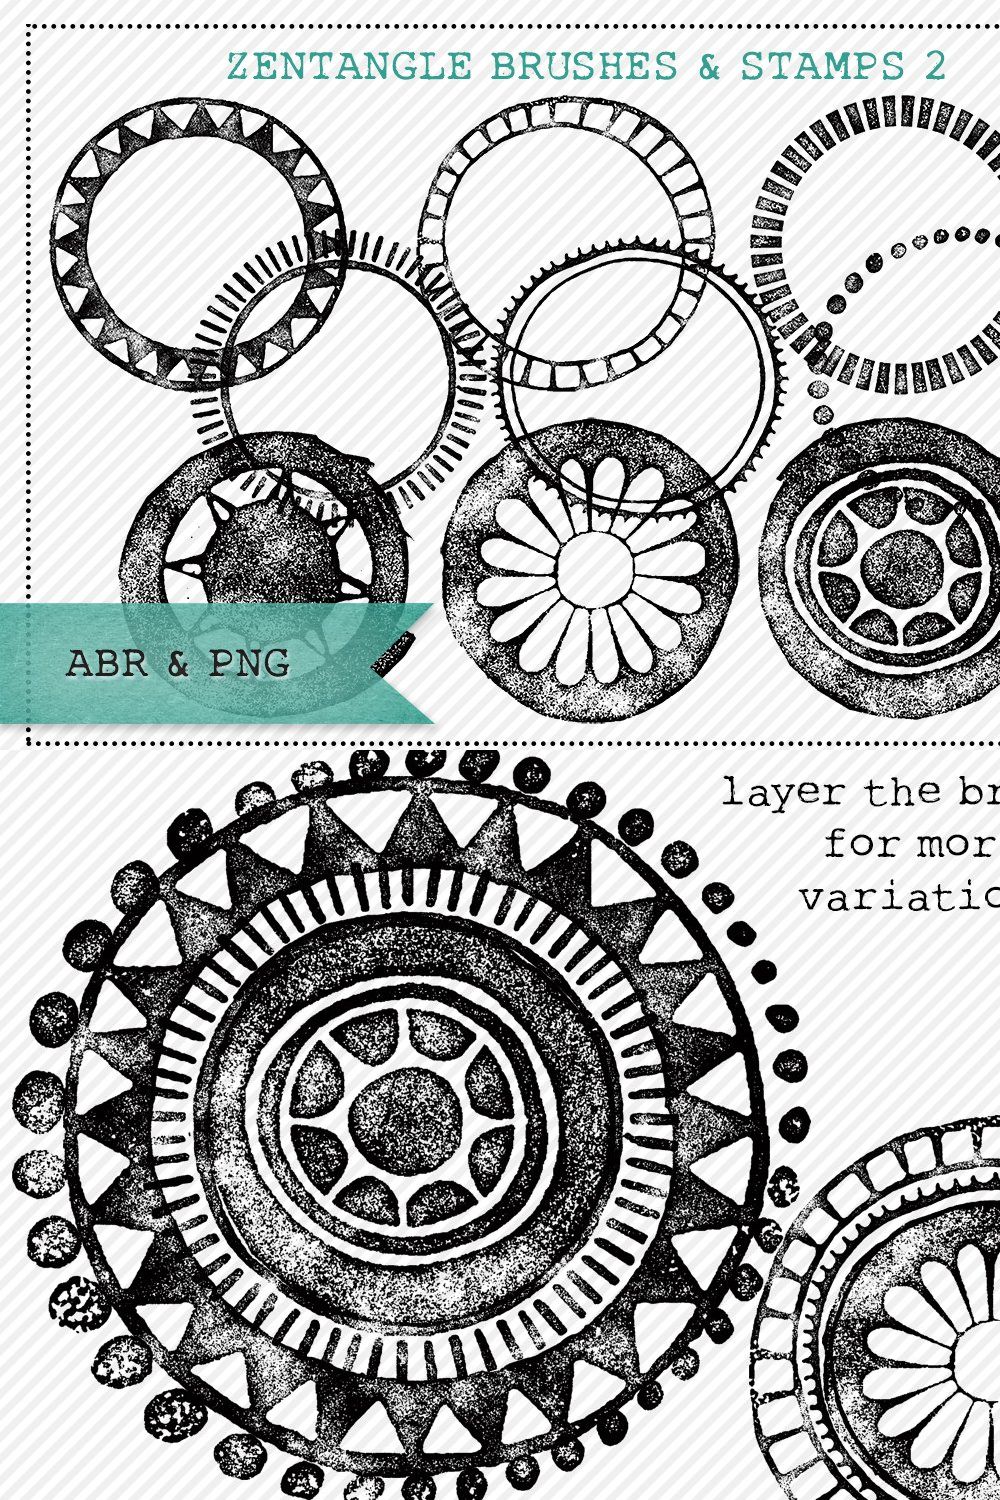 Zentangle Inspired Brushes/Stamps 2 pinterest preview image.